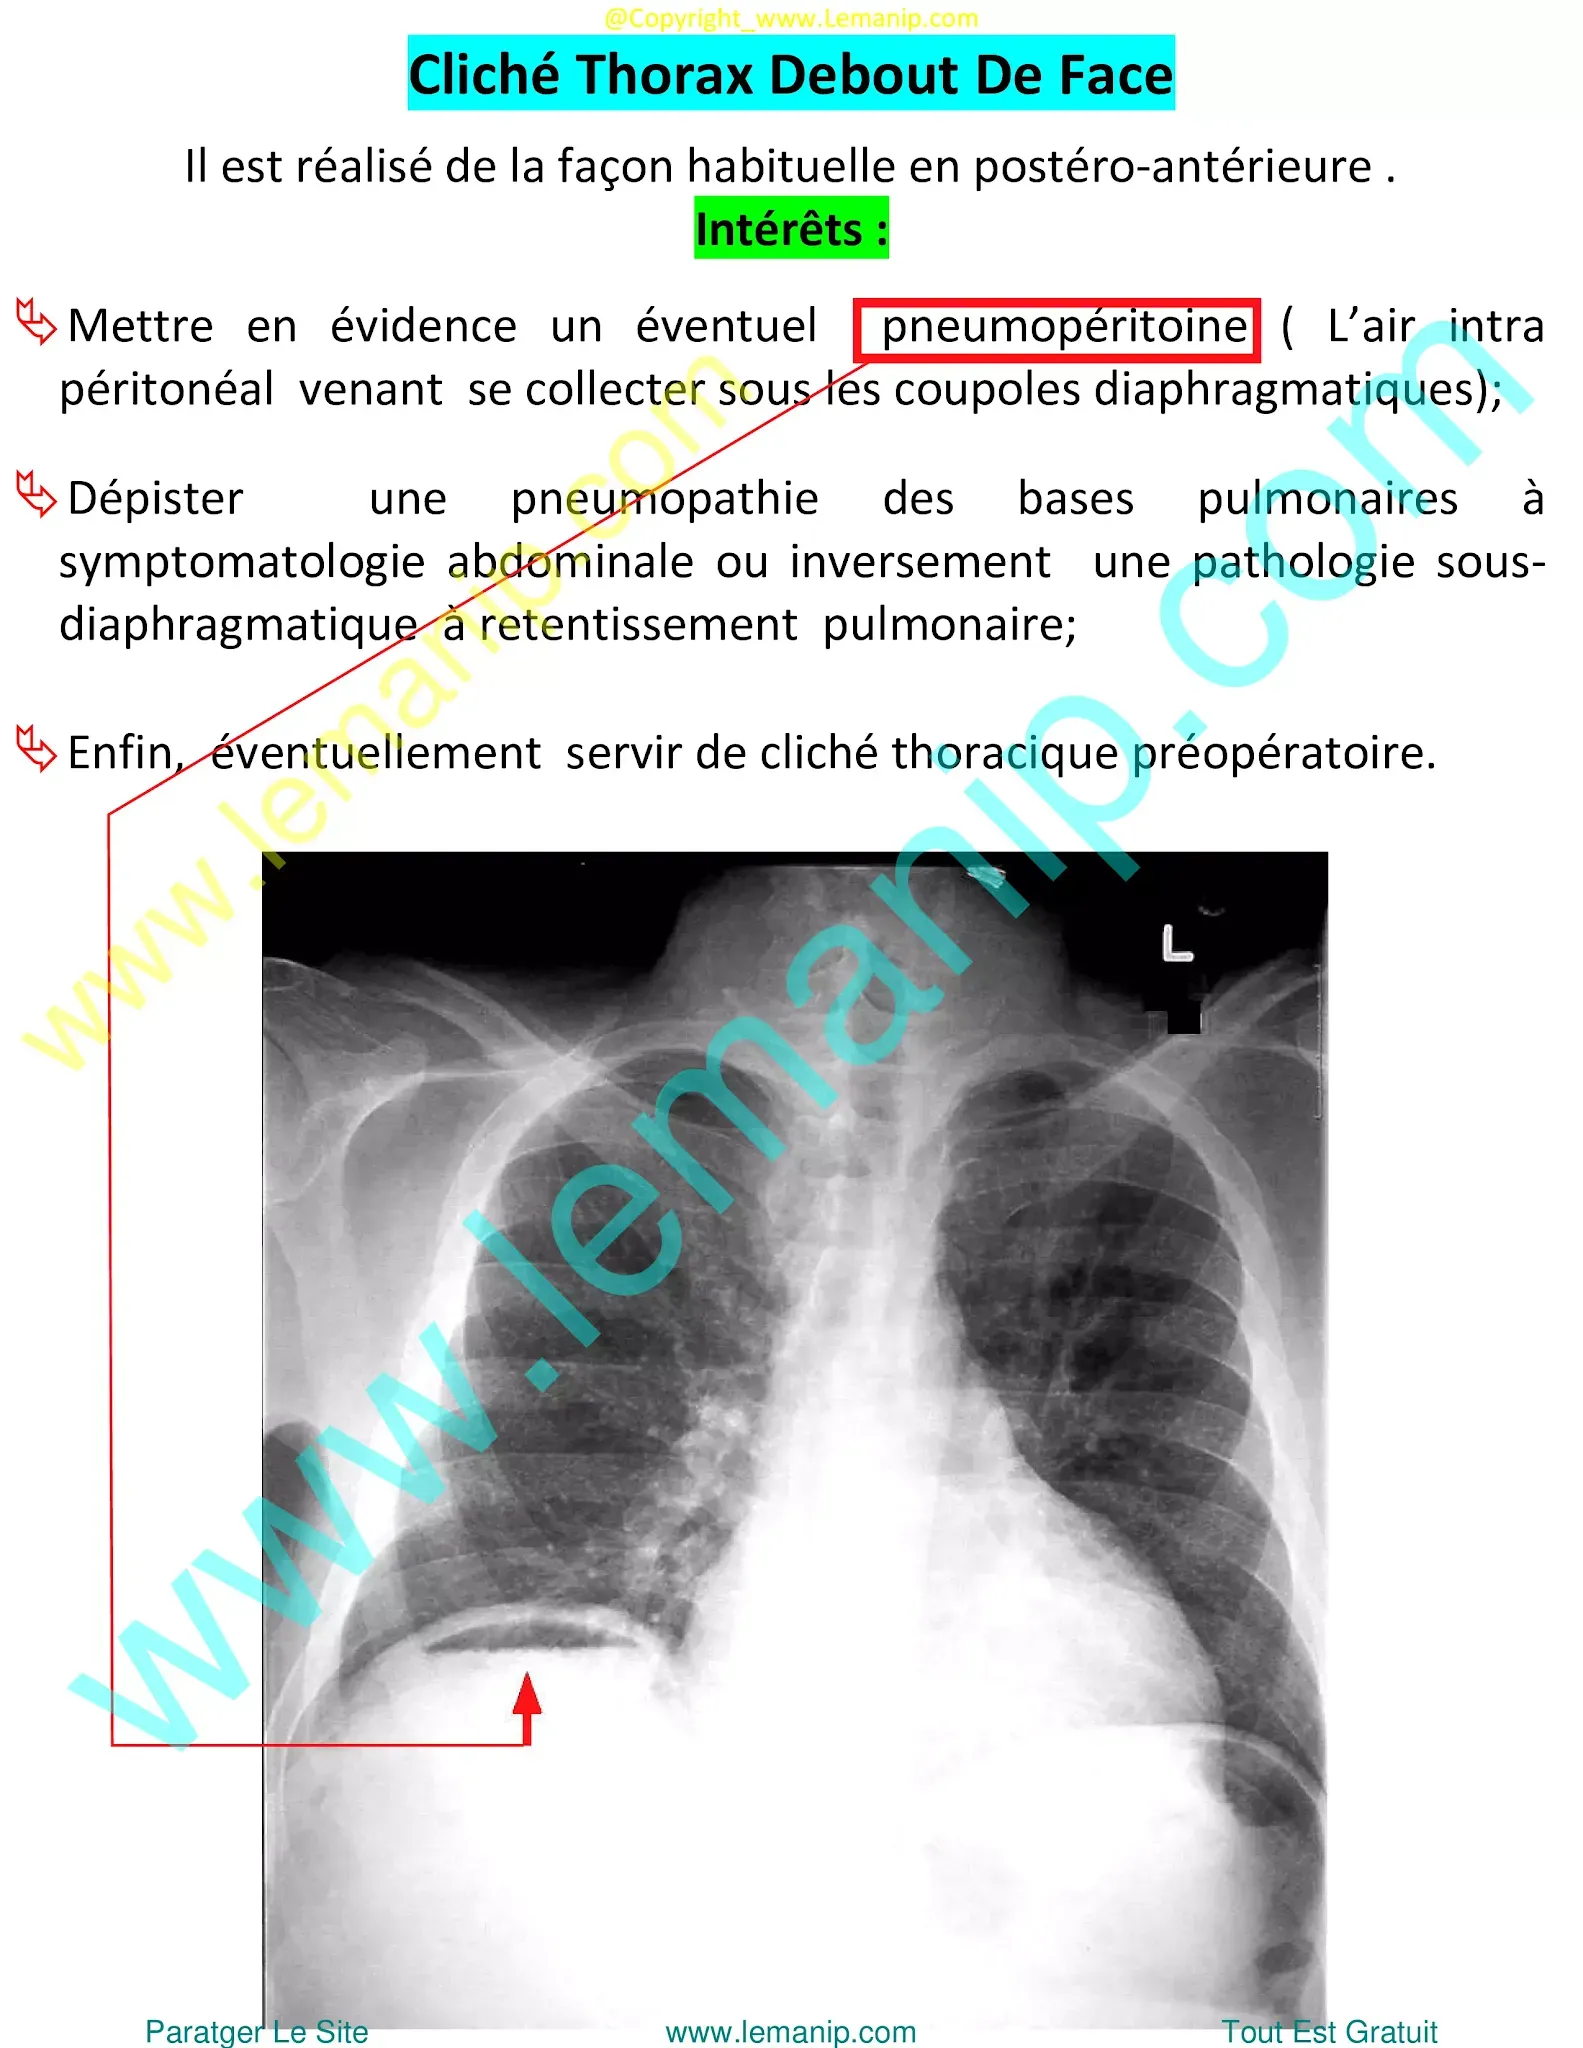 abdominal radiography,abdominal xray,abd xray,belly x ray,x ray on abdomen,xray on abdomen,abdominal xray price,stomach x ray,stomach on xray,pain 2 inches left of belly button after eating,lower back pain that wraps around to abdomen